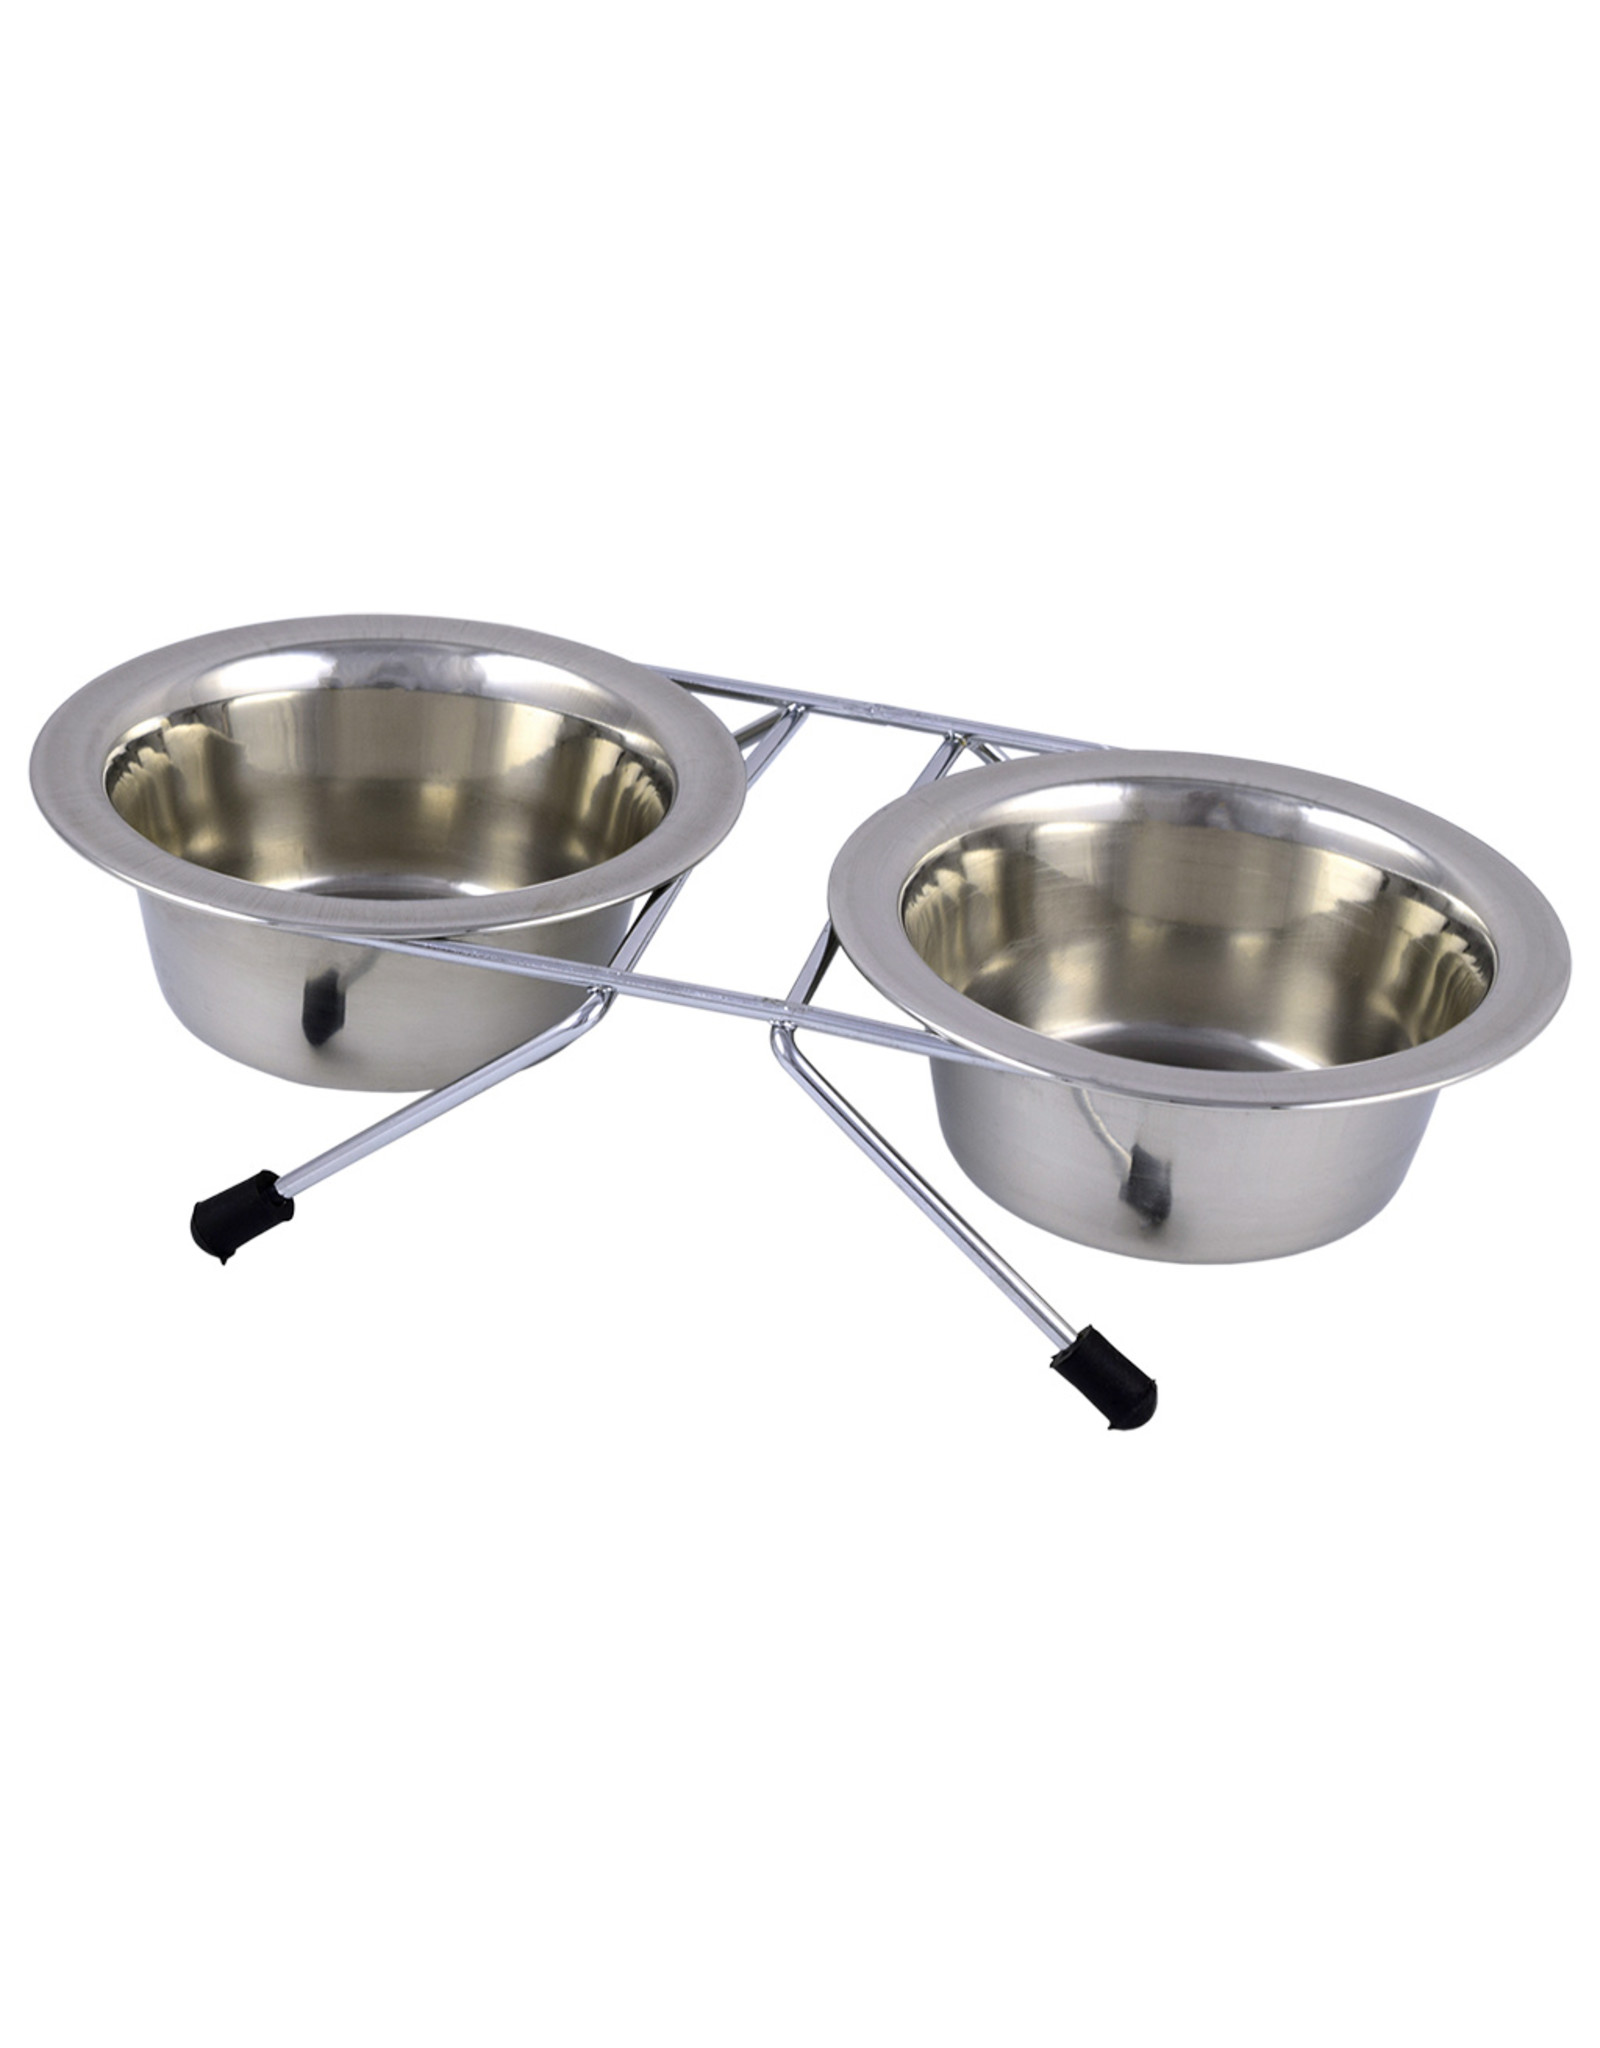 Unleashed Stainless Steel Double Diner